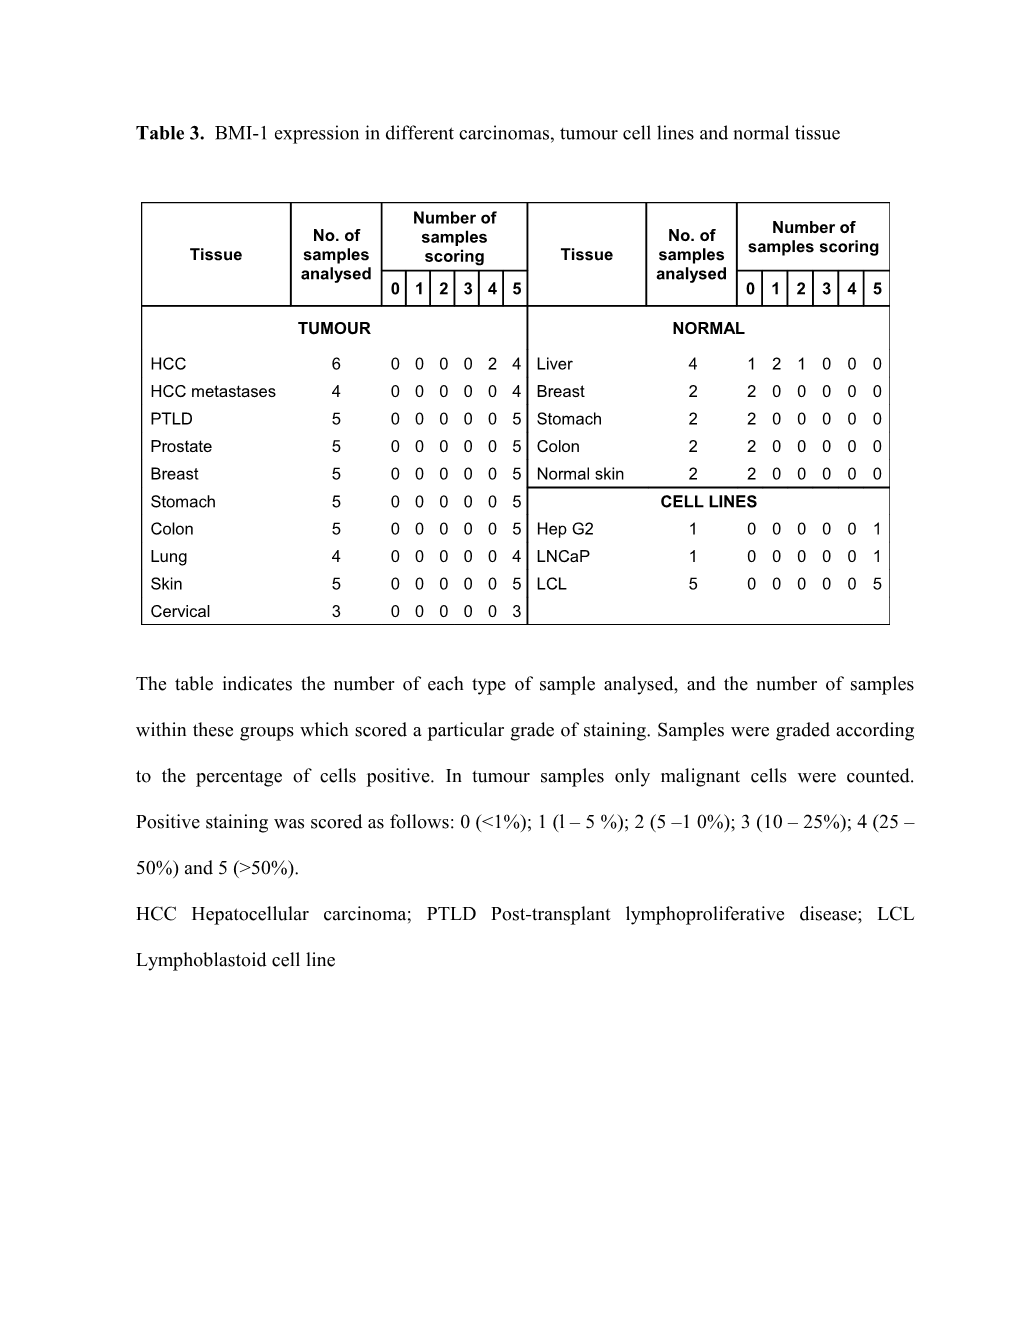 Table 3. BMI-1 Expression in Different Carcinomas, Tumour Cell Lines and Normal Tissue